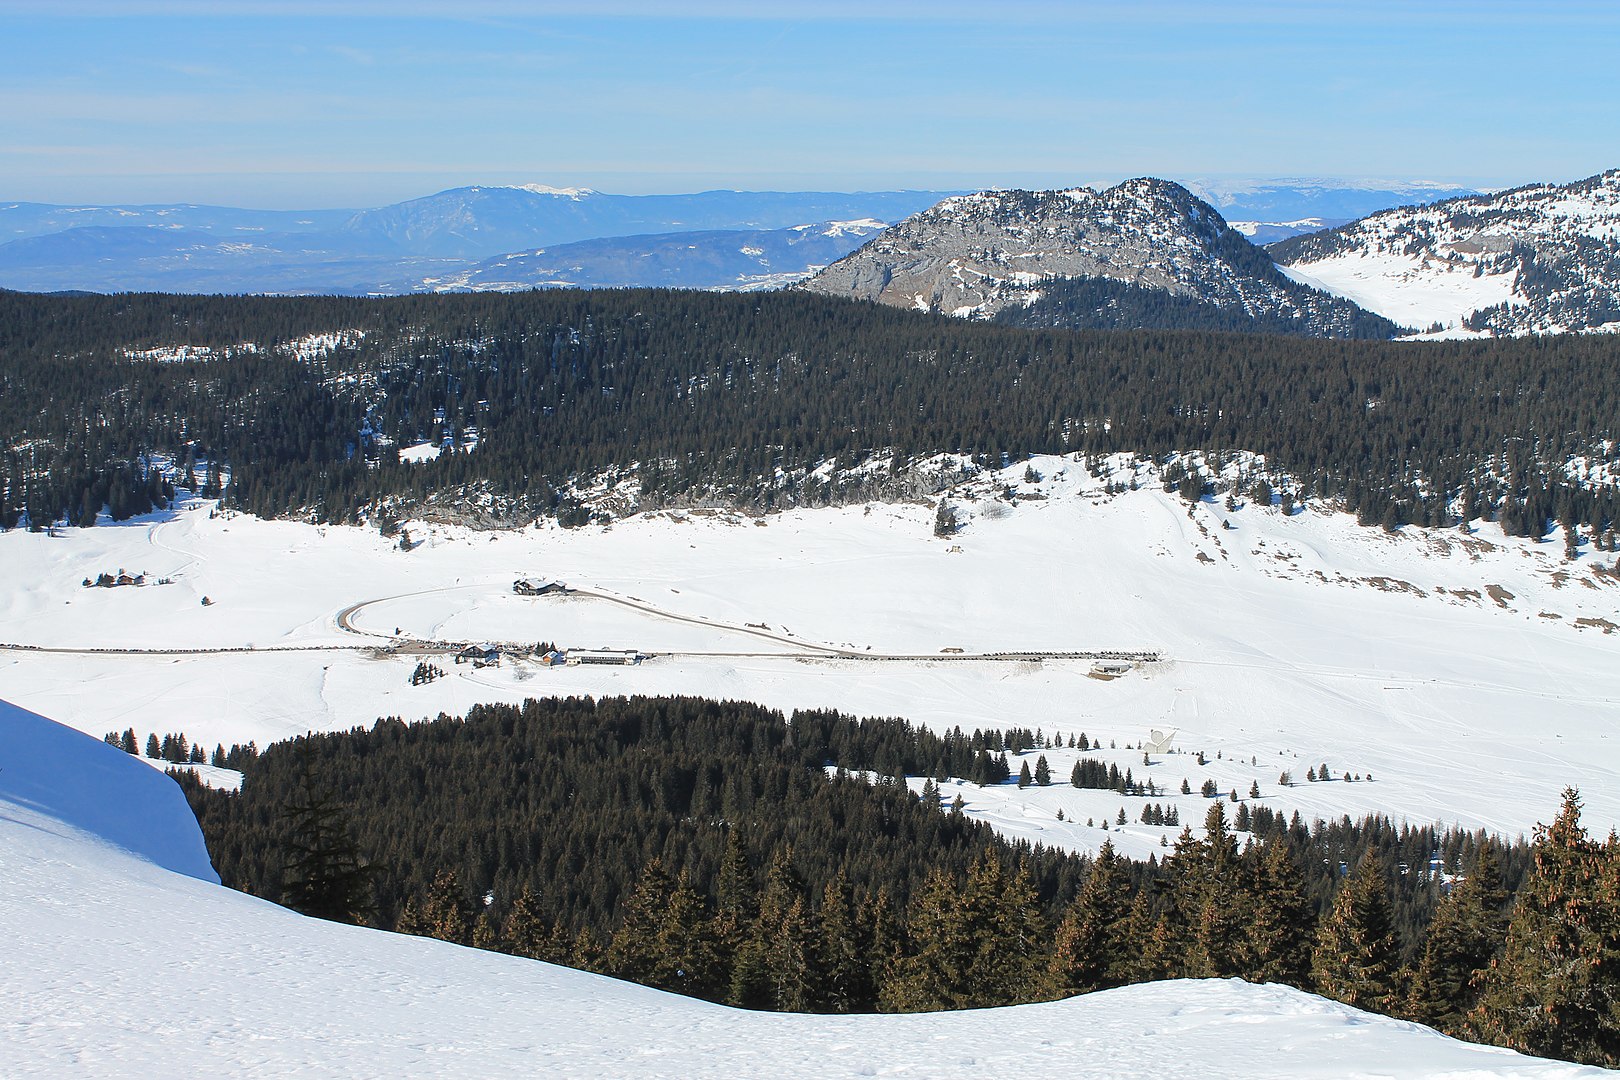 Plateau des Glières in winter © B. Brassoud - licence [CC BY-SA 4.0] from Wikimedia Commons